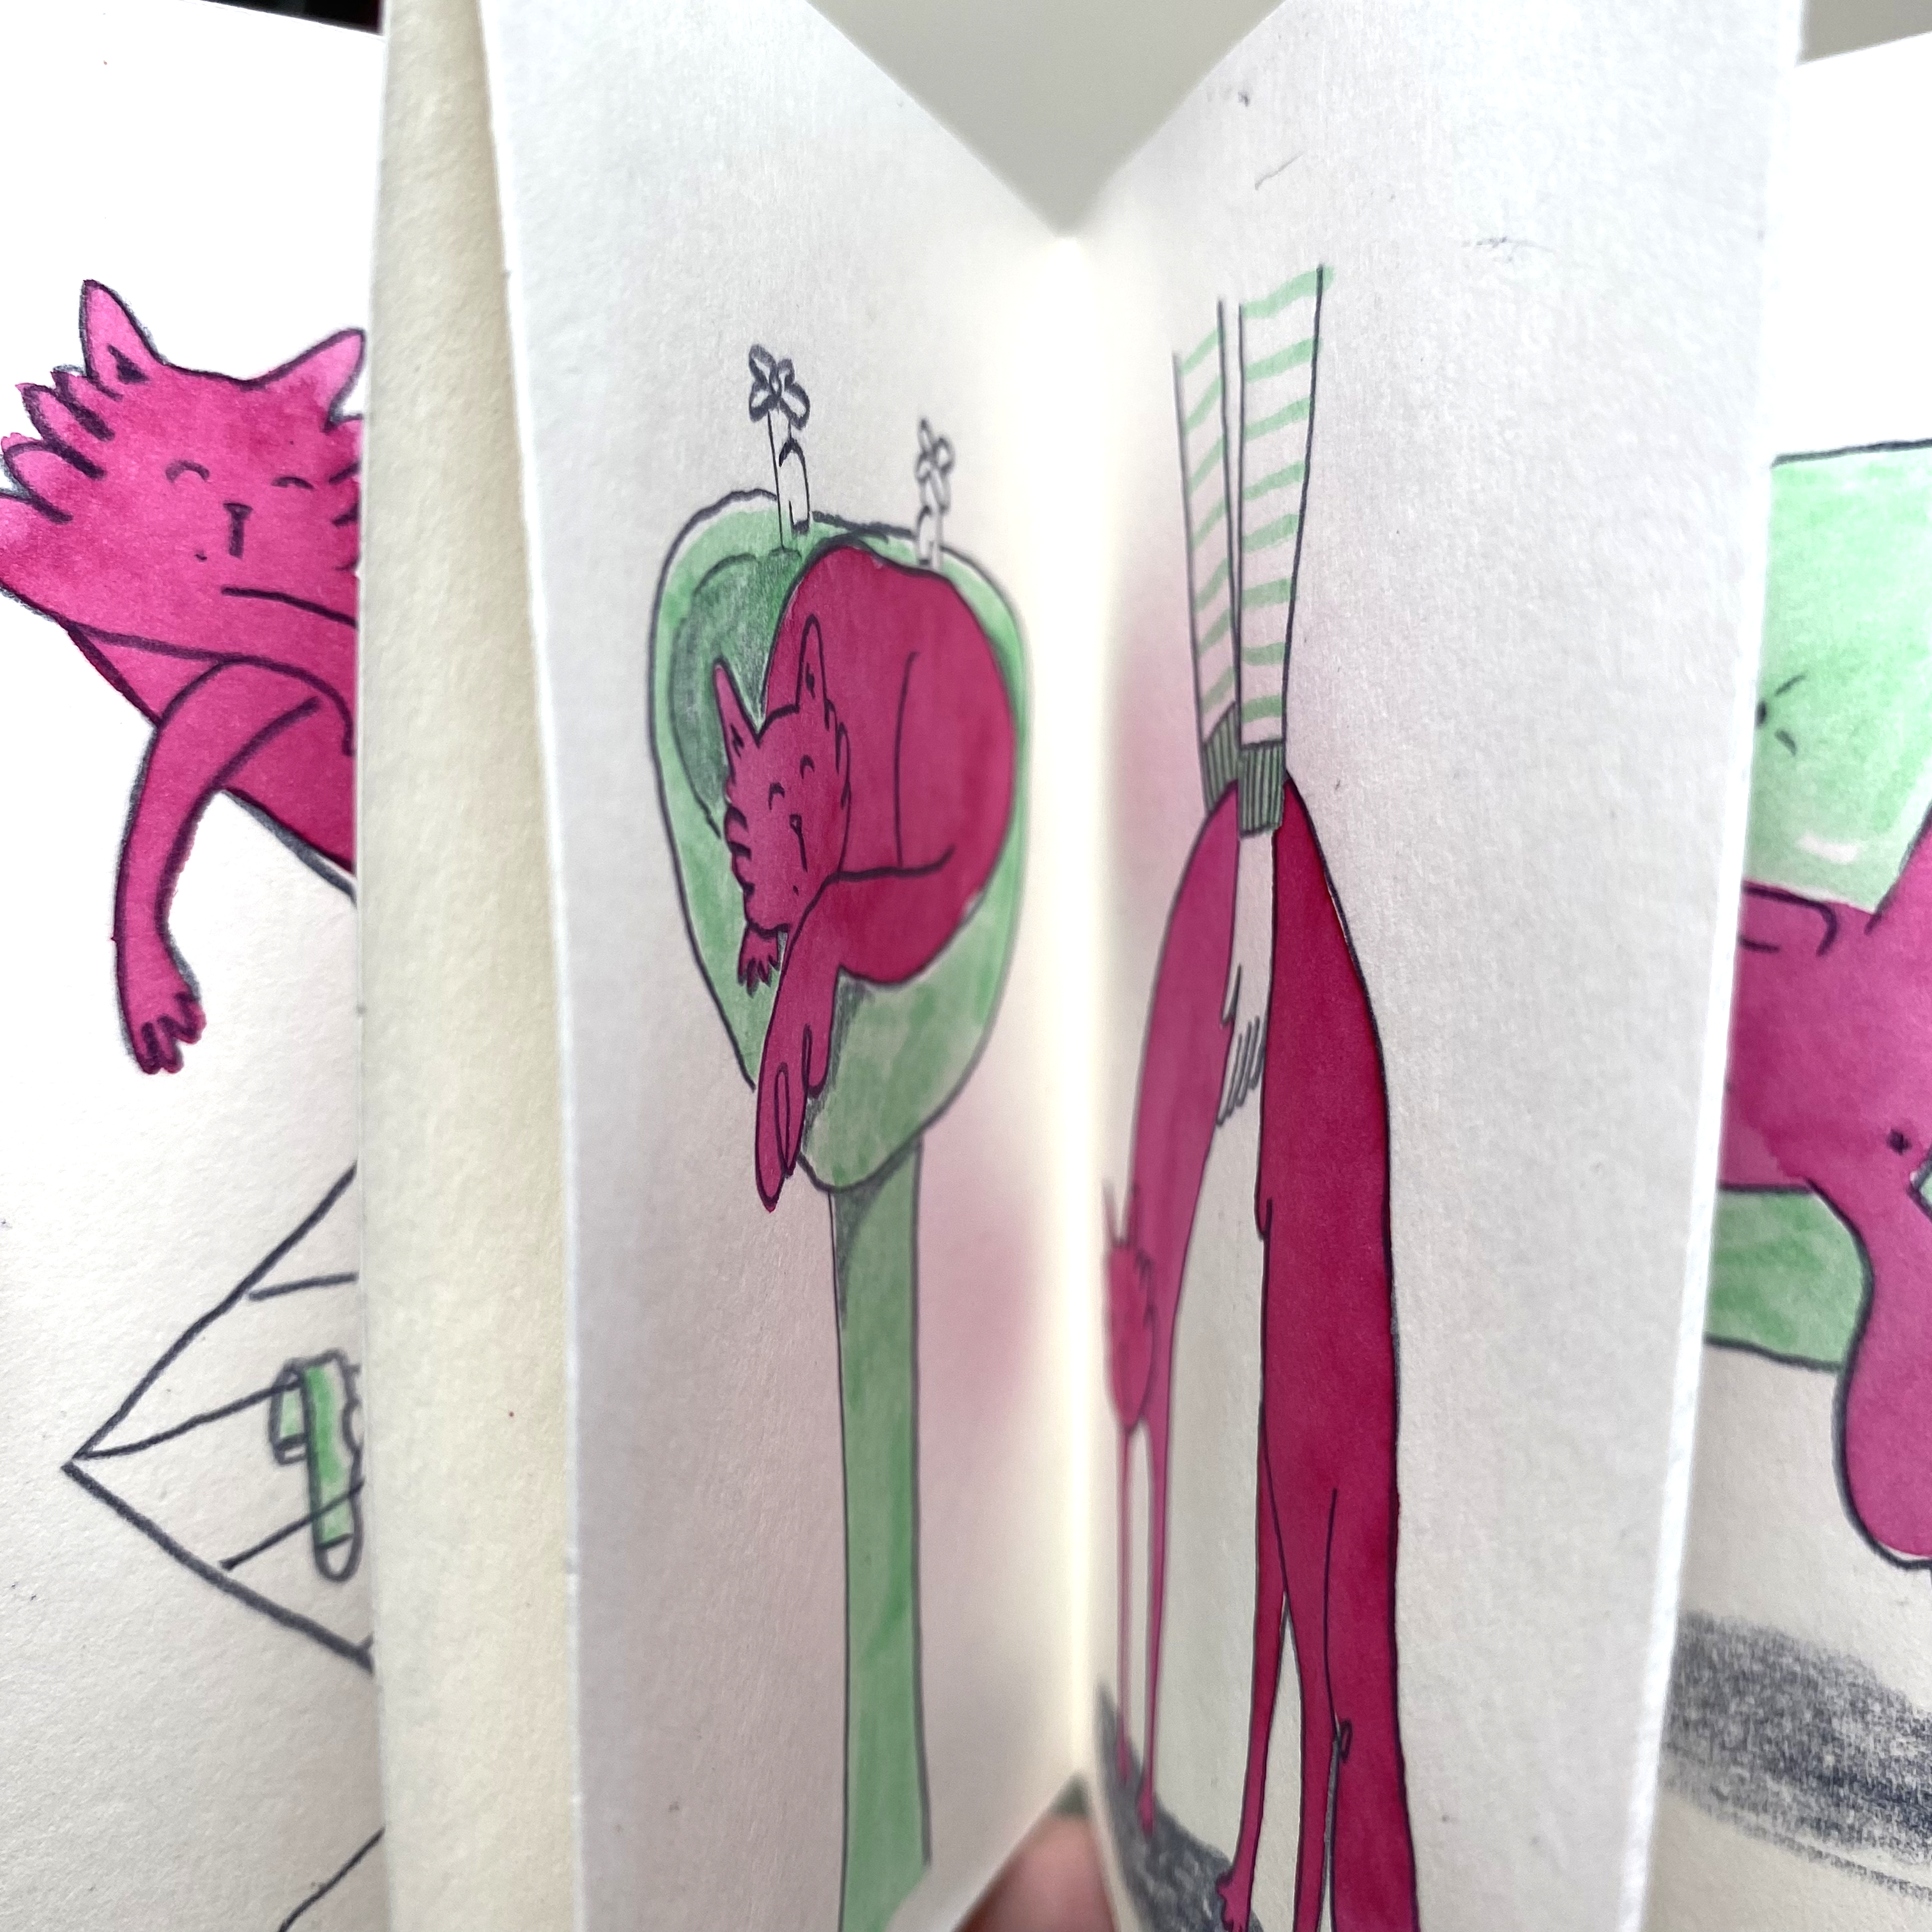 Cats Volume 1 -  A Hand-Drawn Zine by Emma Woodthorpe (issues 1-4)